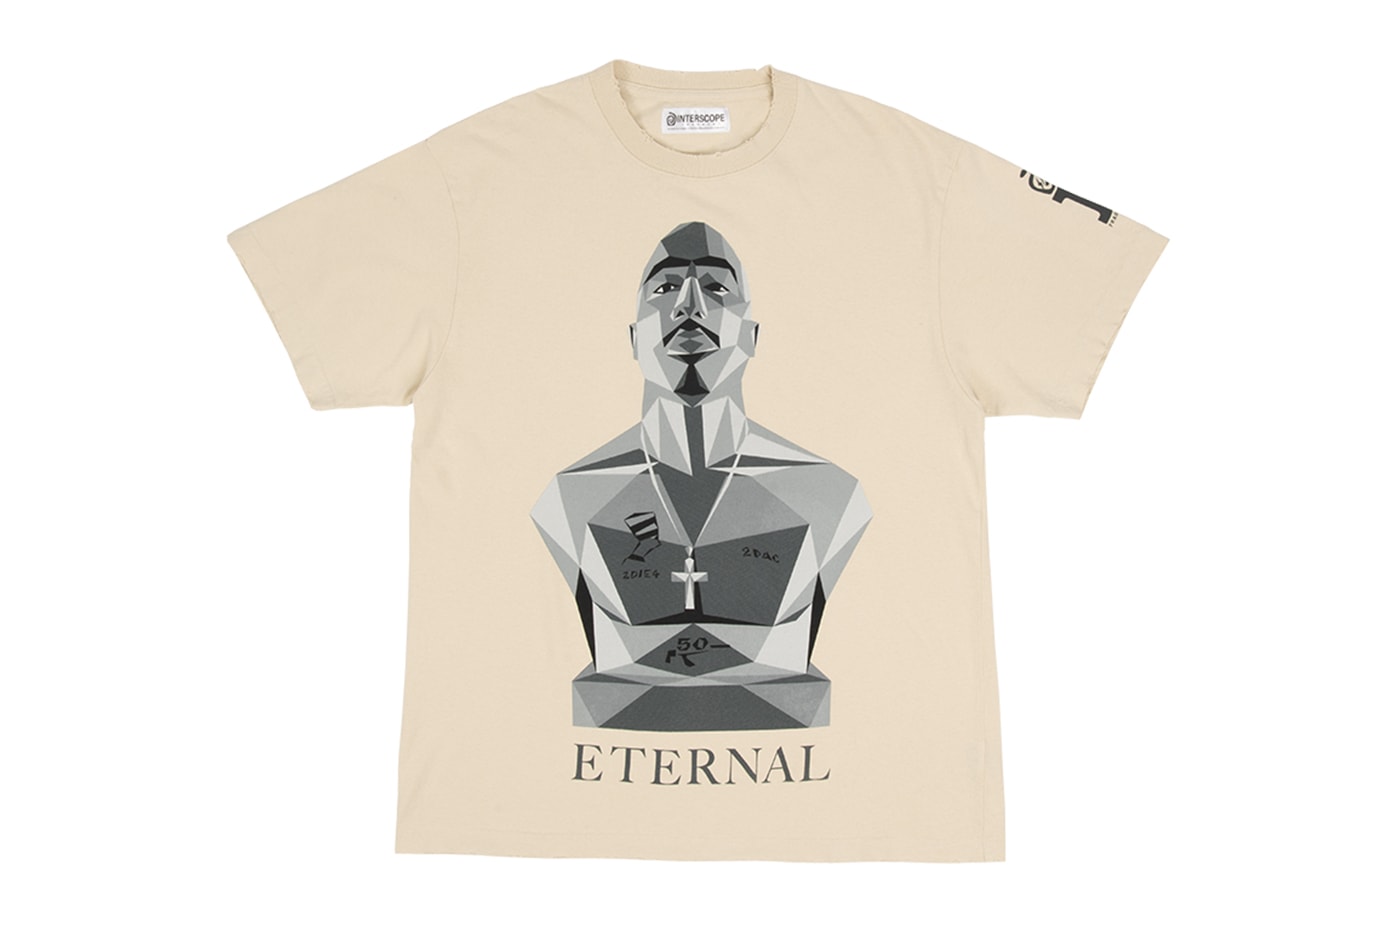 Interscope Records fragment design 2Pac Collection Release Info Date Buy Price Tupac Shakur